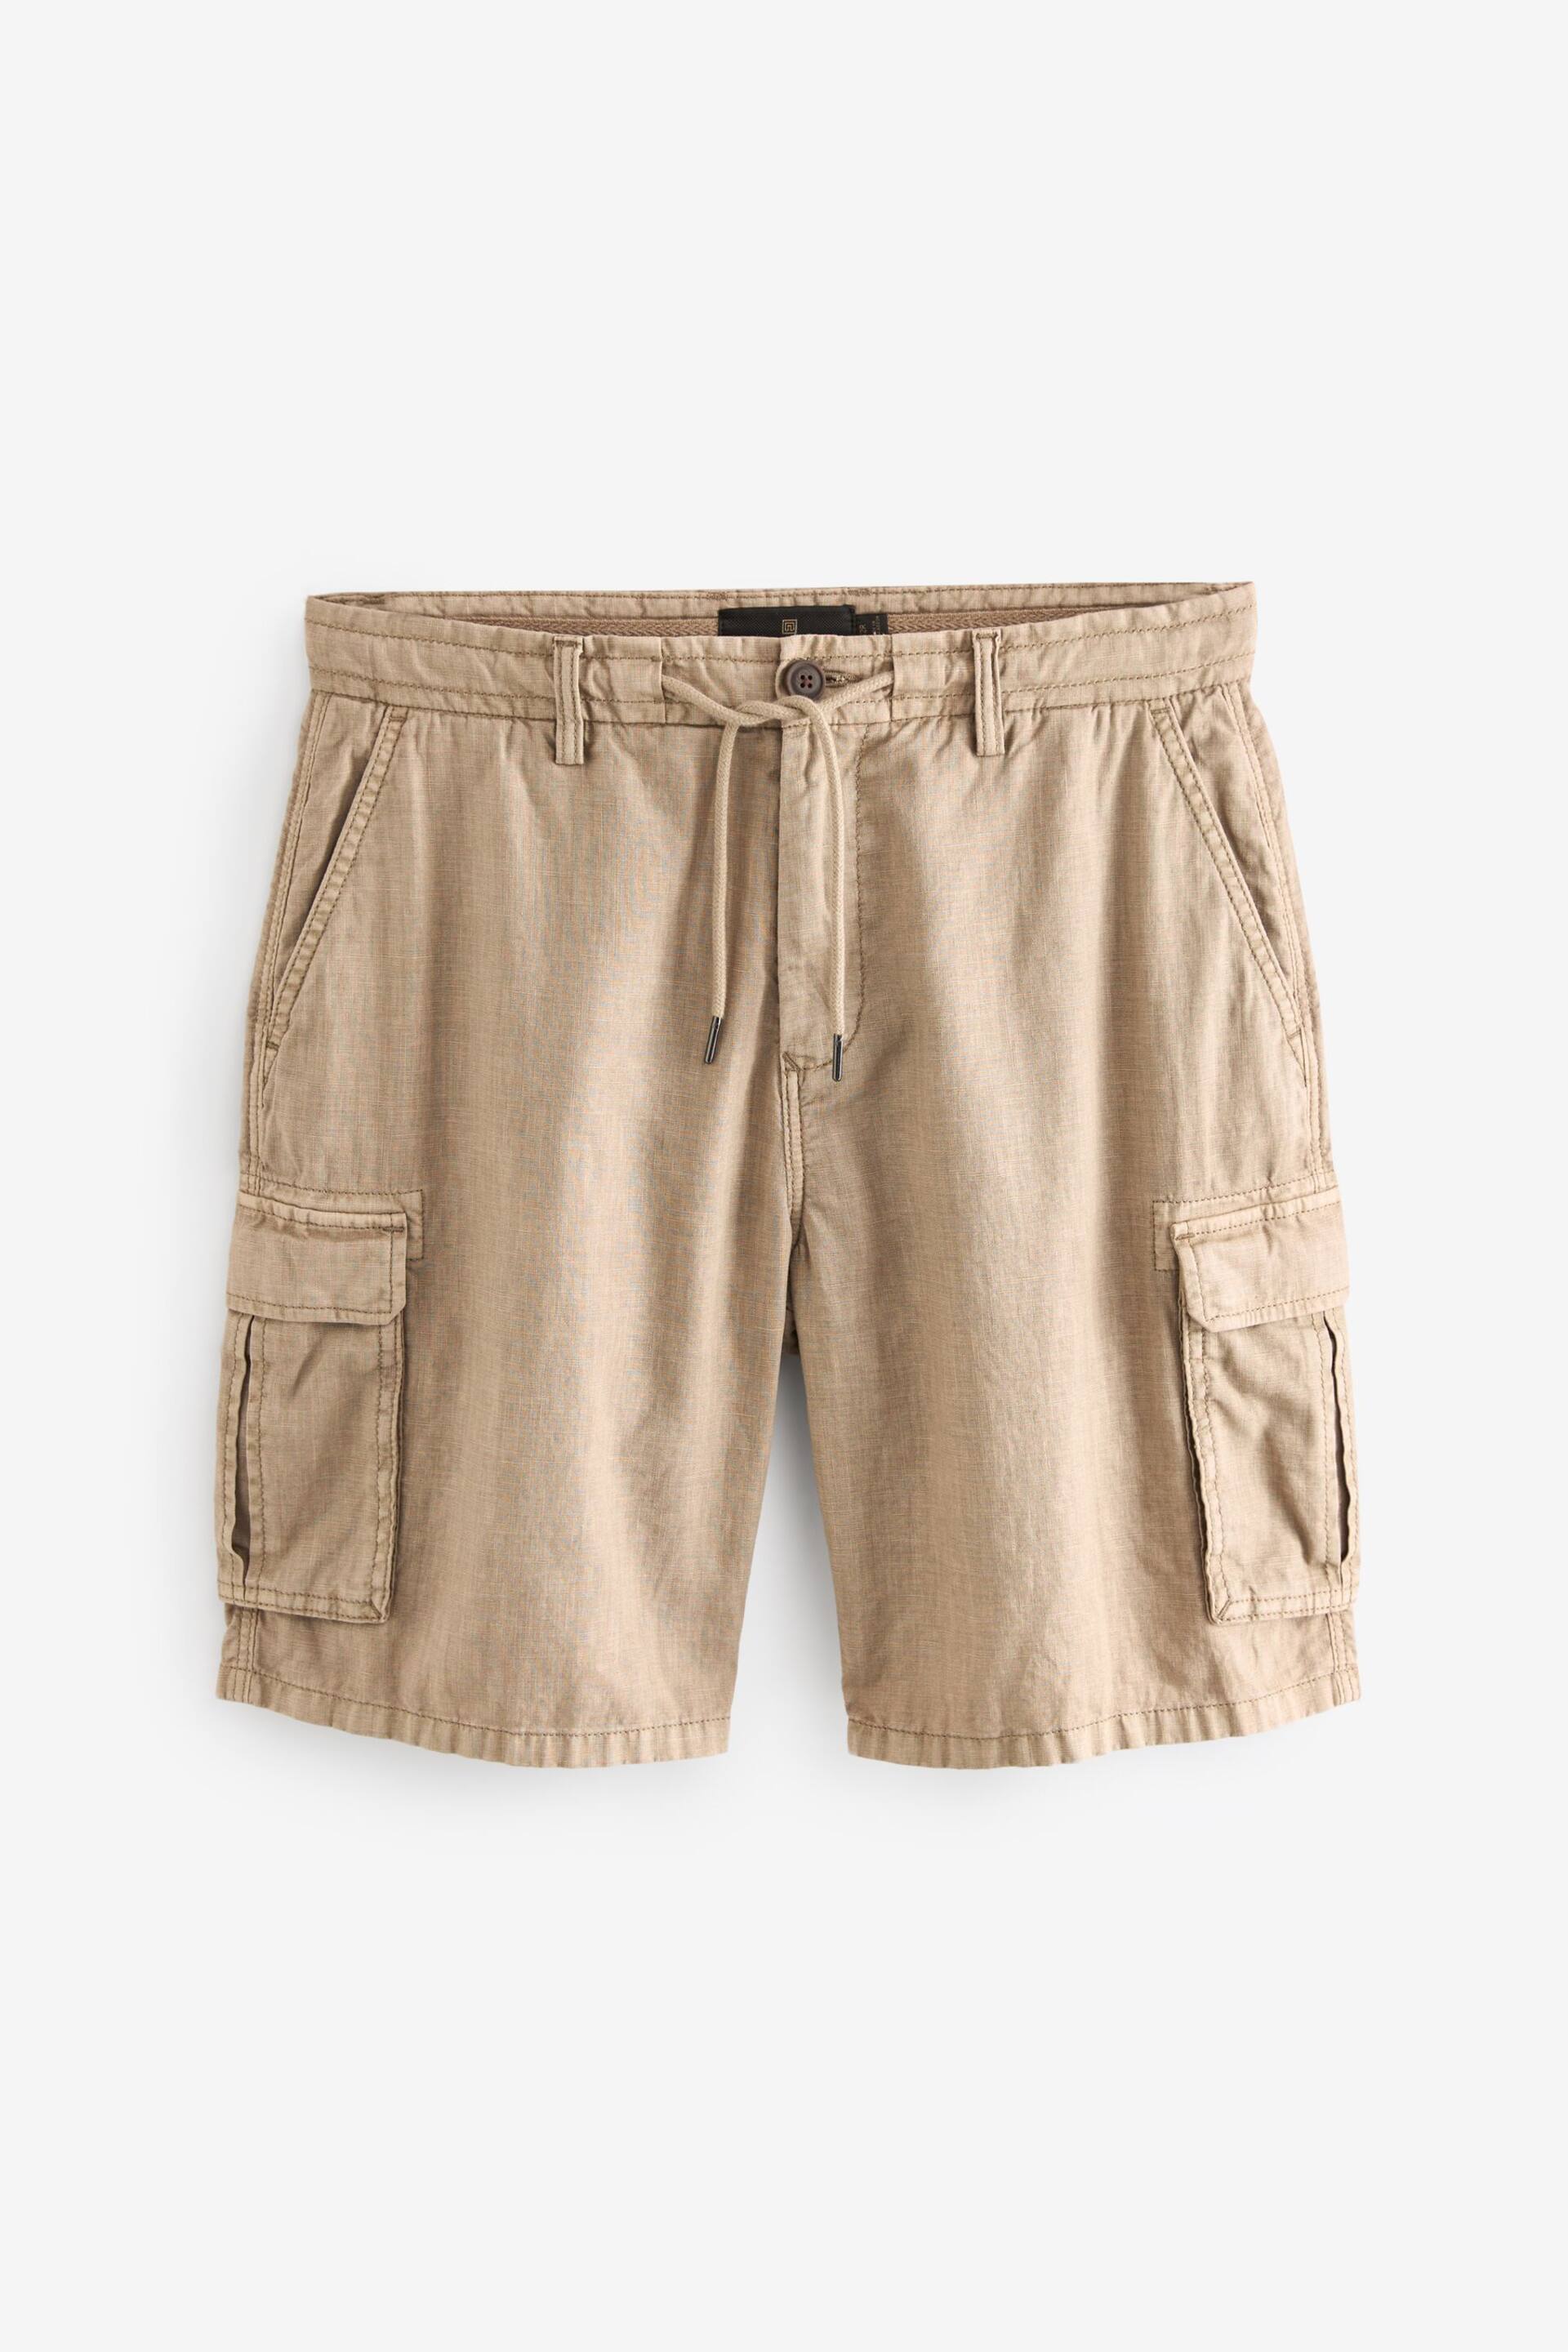 Stone Natural Cotton Linen Cargo Shorts - Image 6 of 10